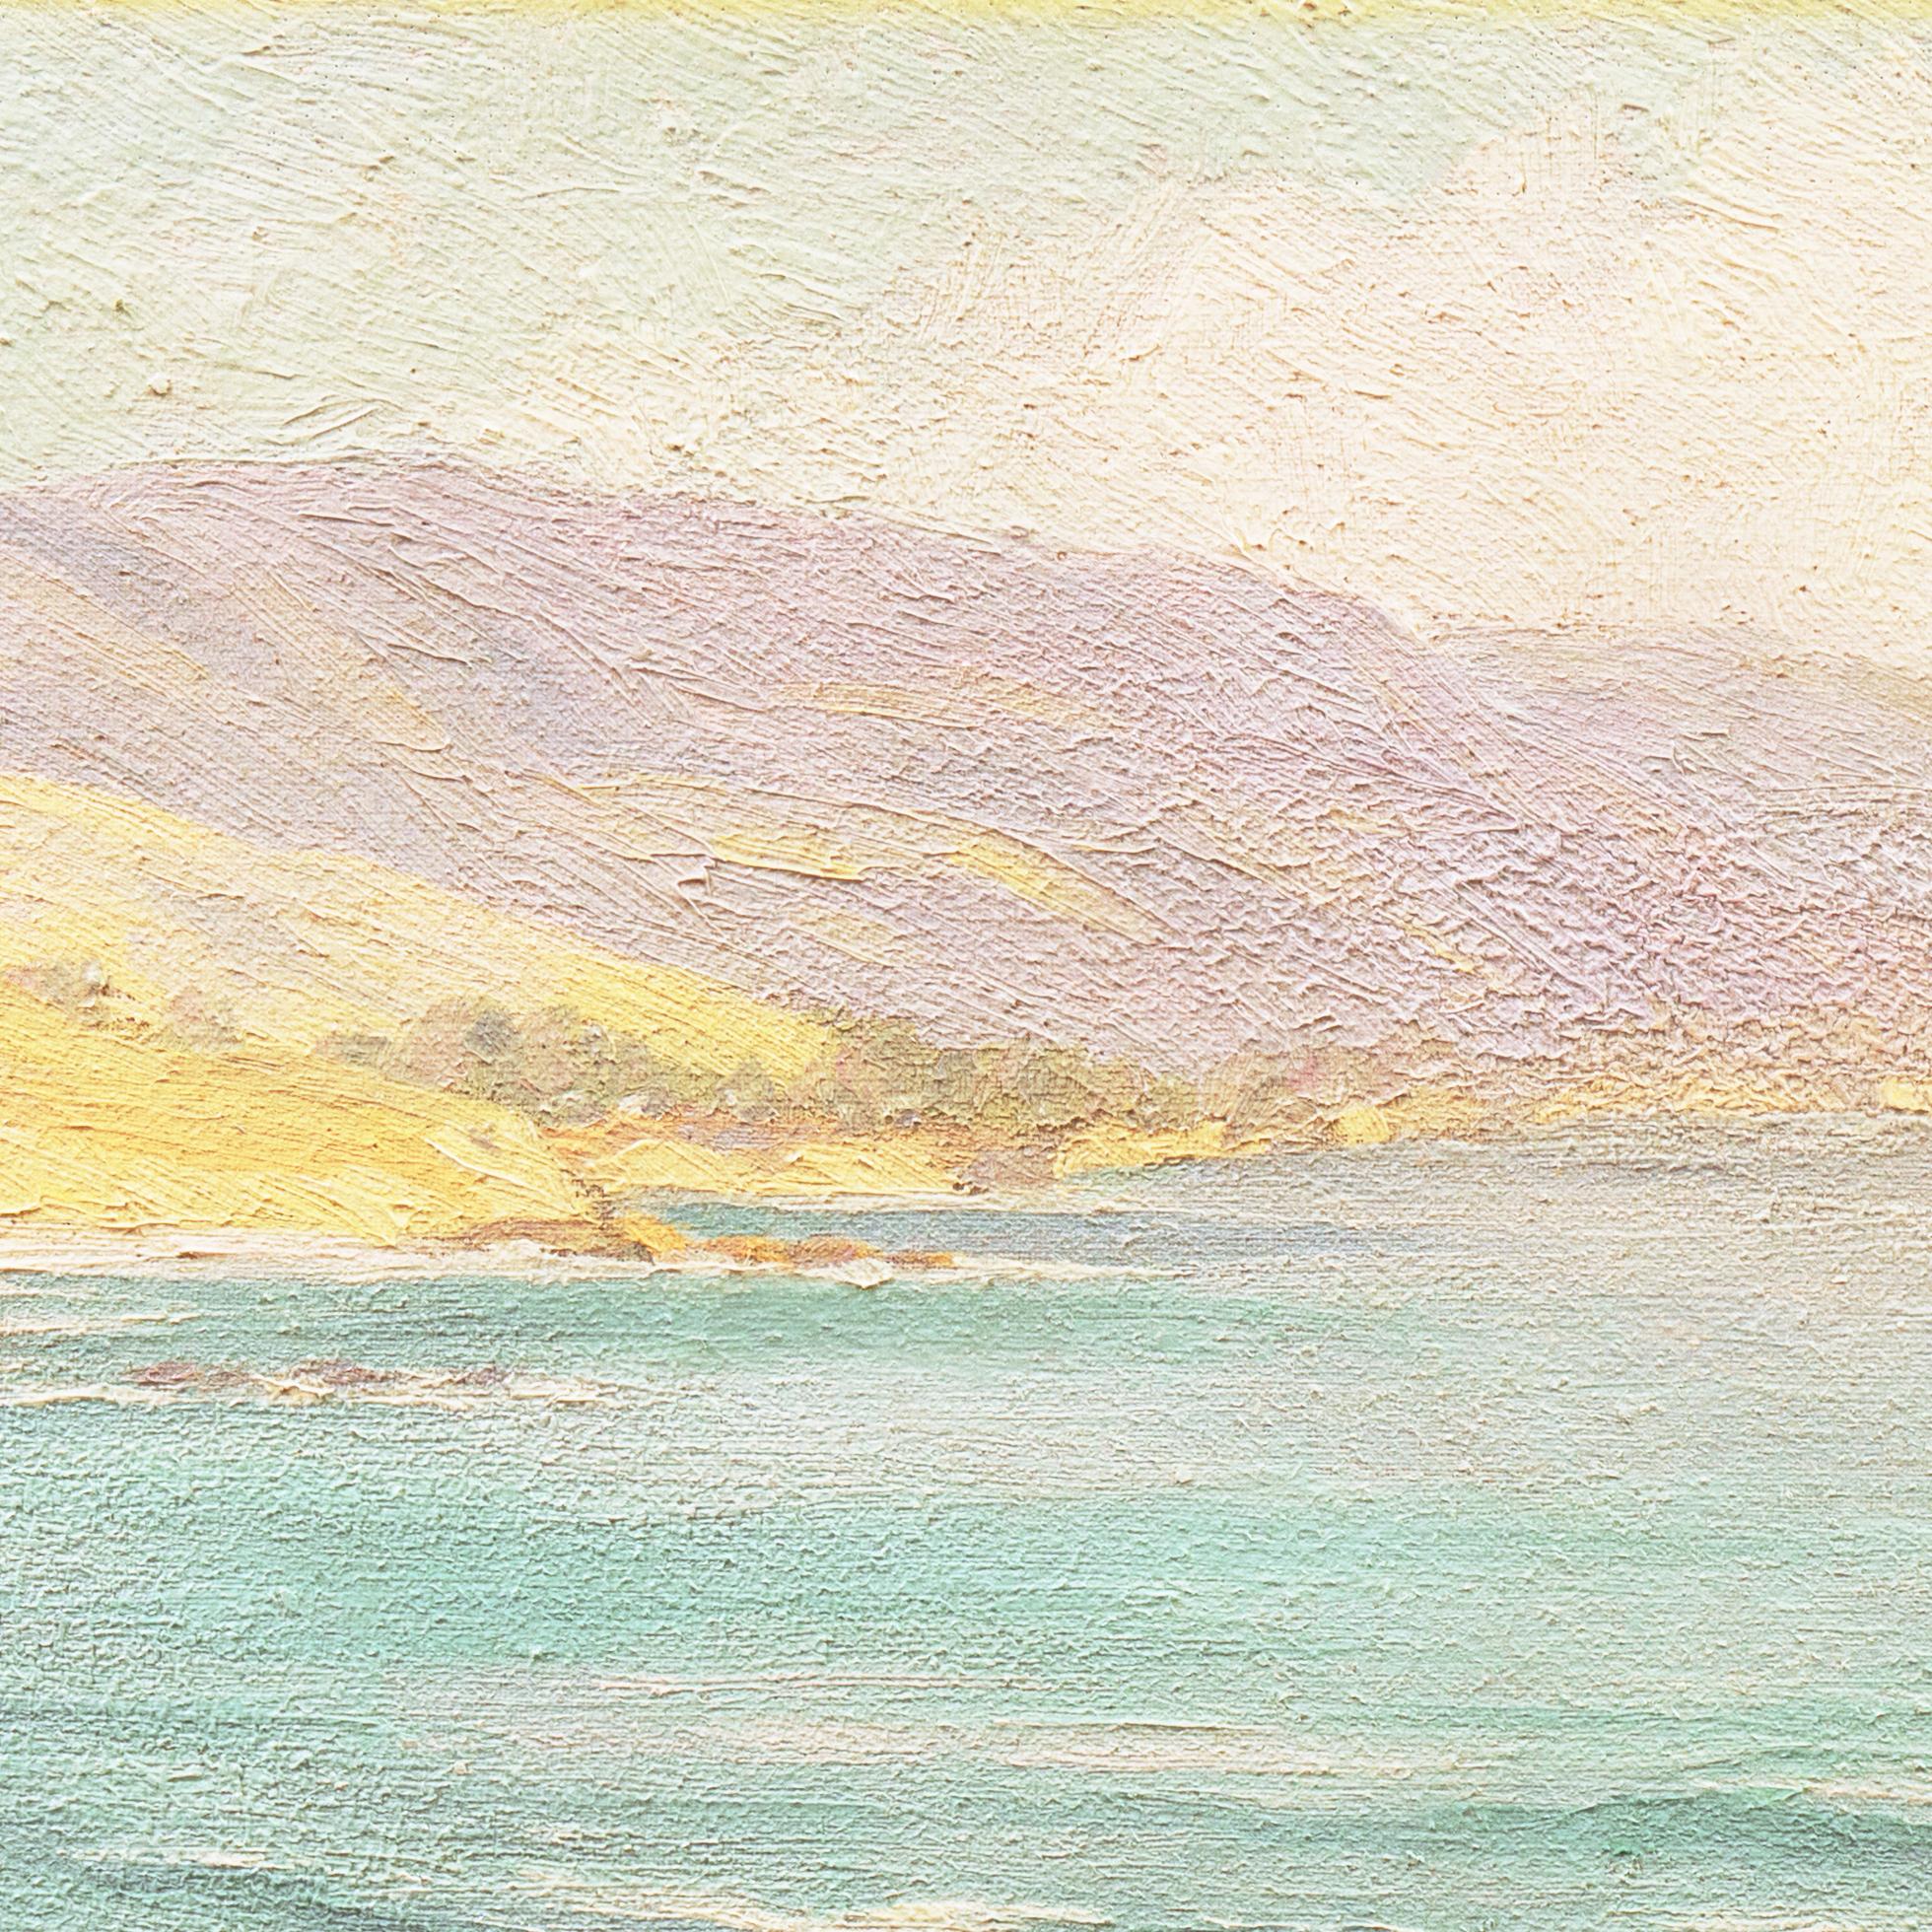  'California Headlands with a View of the Pacific', SFAA, Laguna Beach, ASL NYC - Beige Landscape Painting by Frank William Cuprien